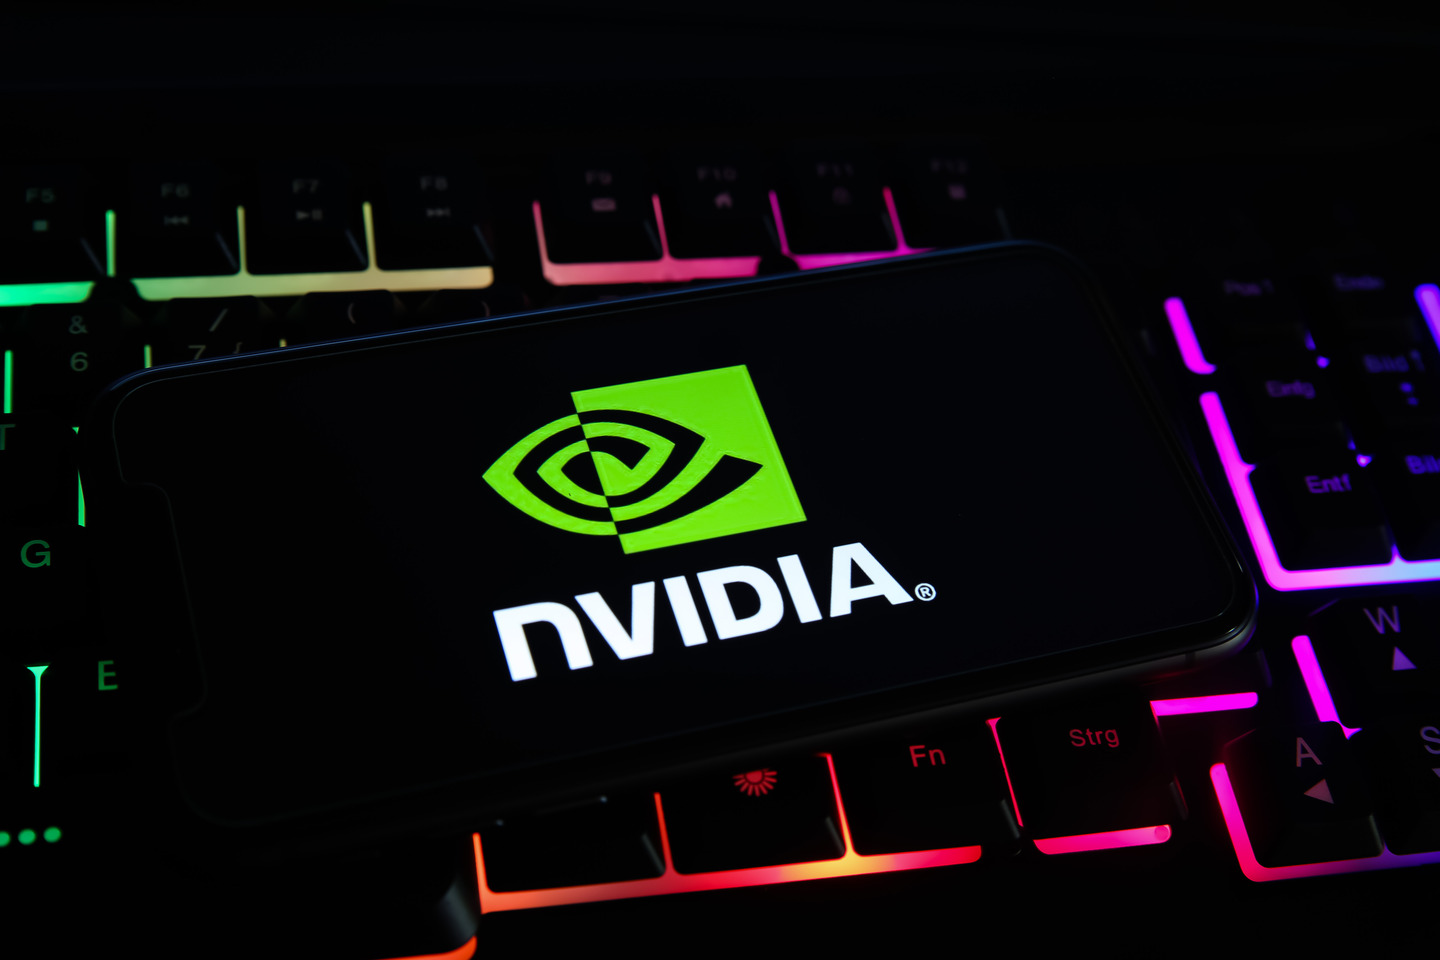 AI chips today - tomorrow the world! Nvidia moves from strength to strength.